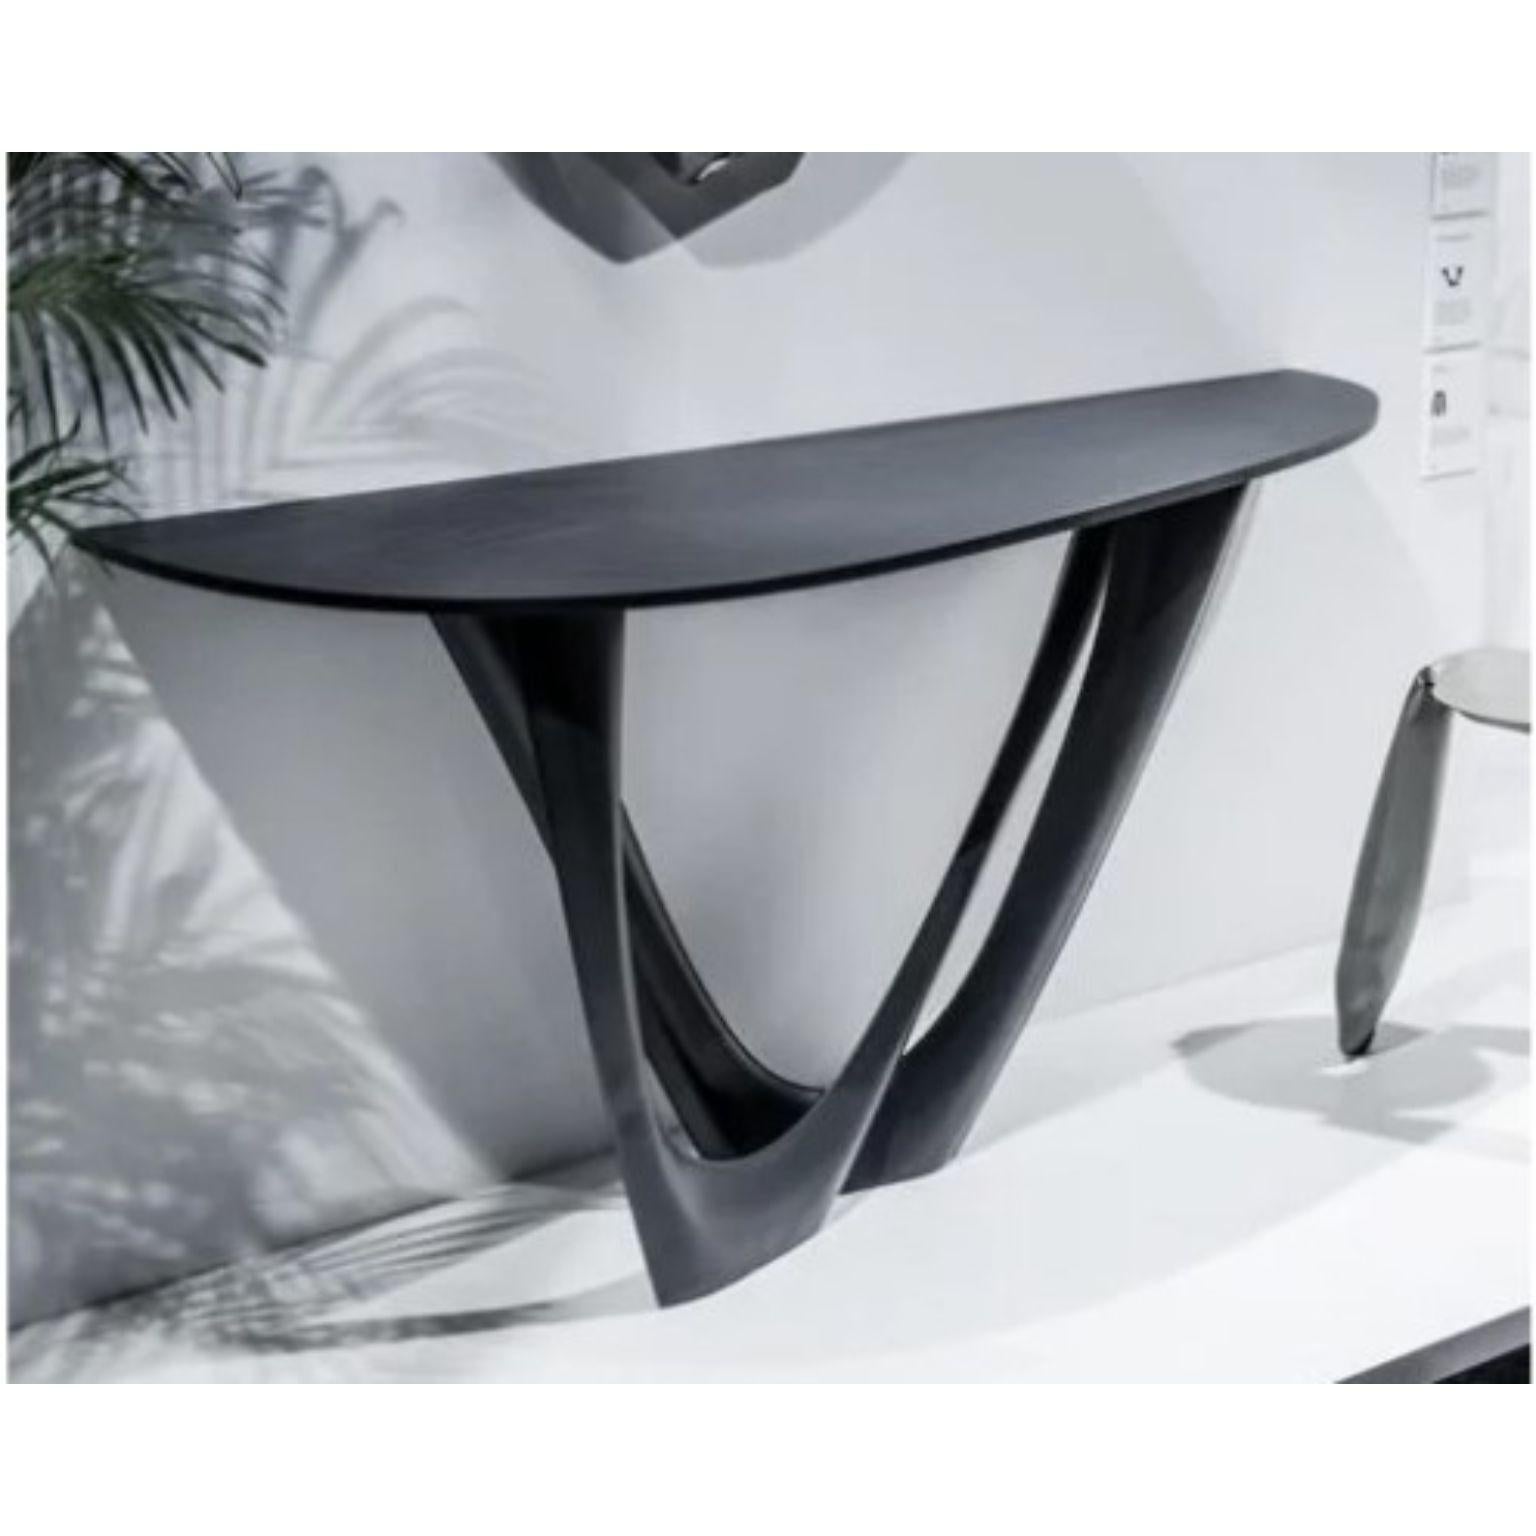 Powder-Coated Graphite G-Console Duo Concrete Top and Steel Base by Zieta For Sale